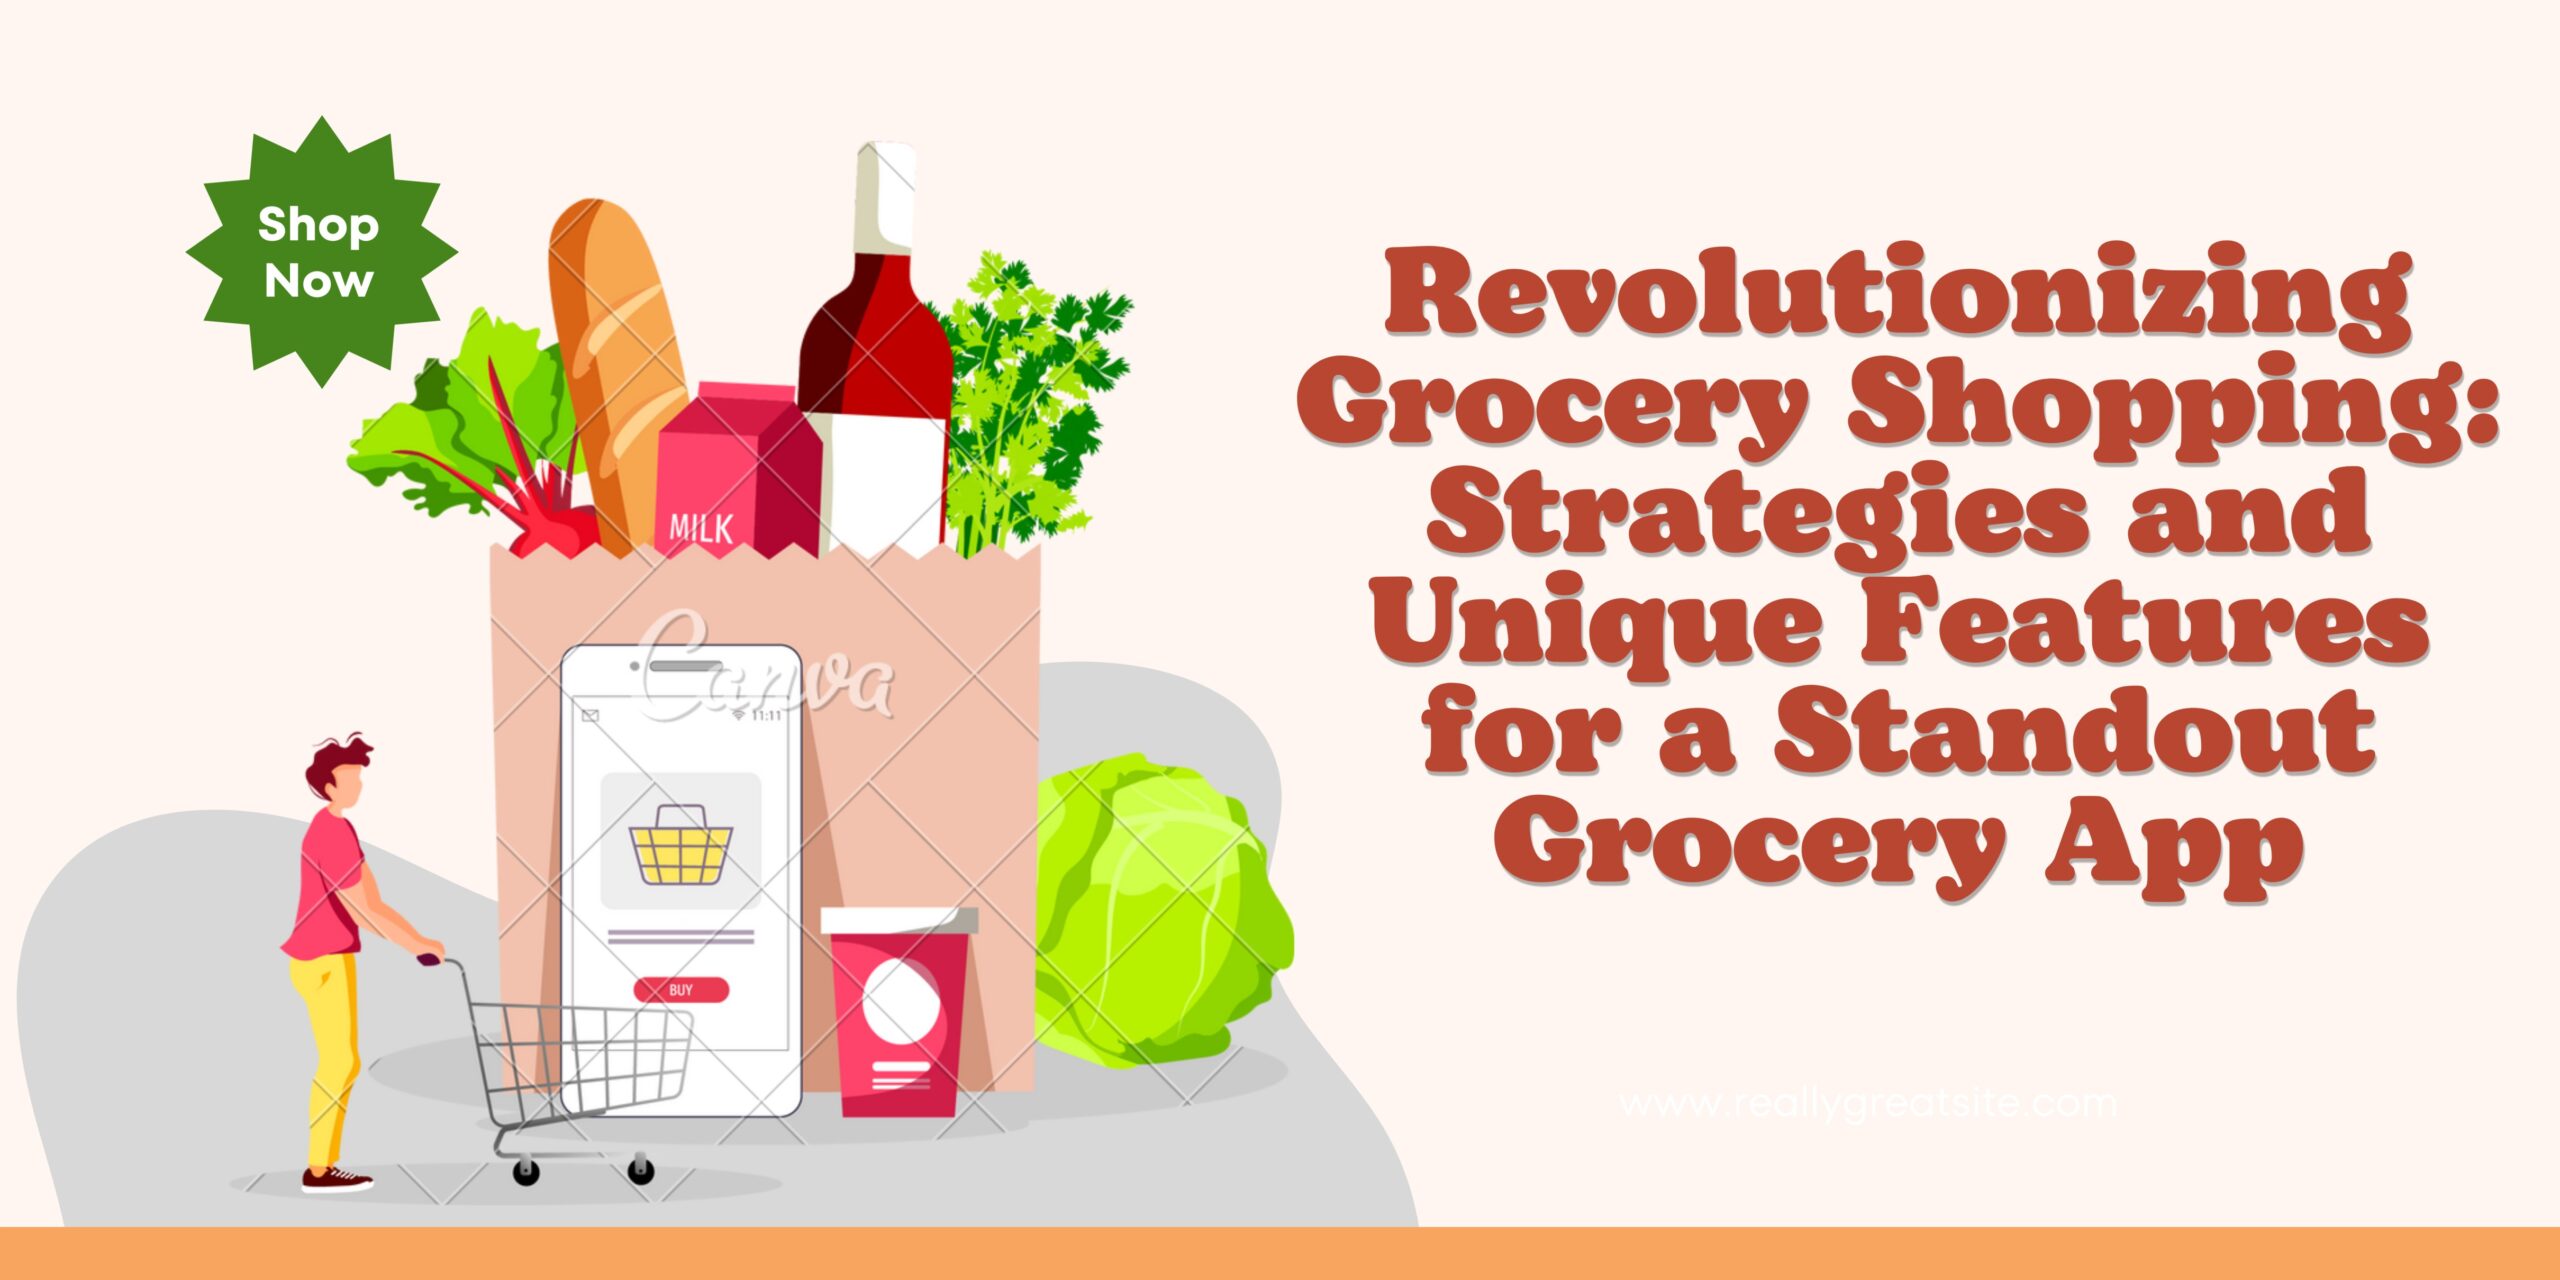 Revolutionizing Grocery Shopping: Strategies and Unique Features for a Standout Grocery App